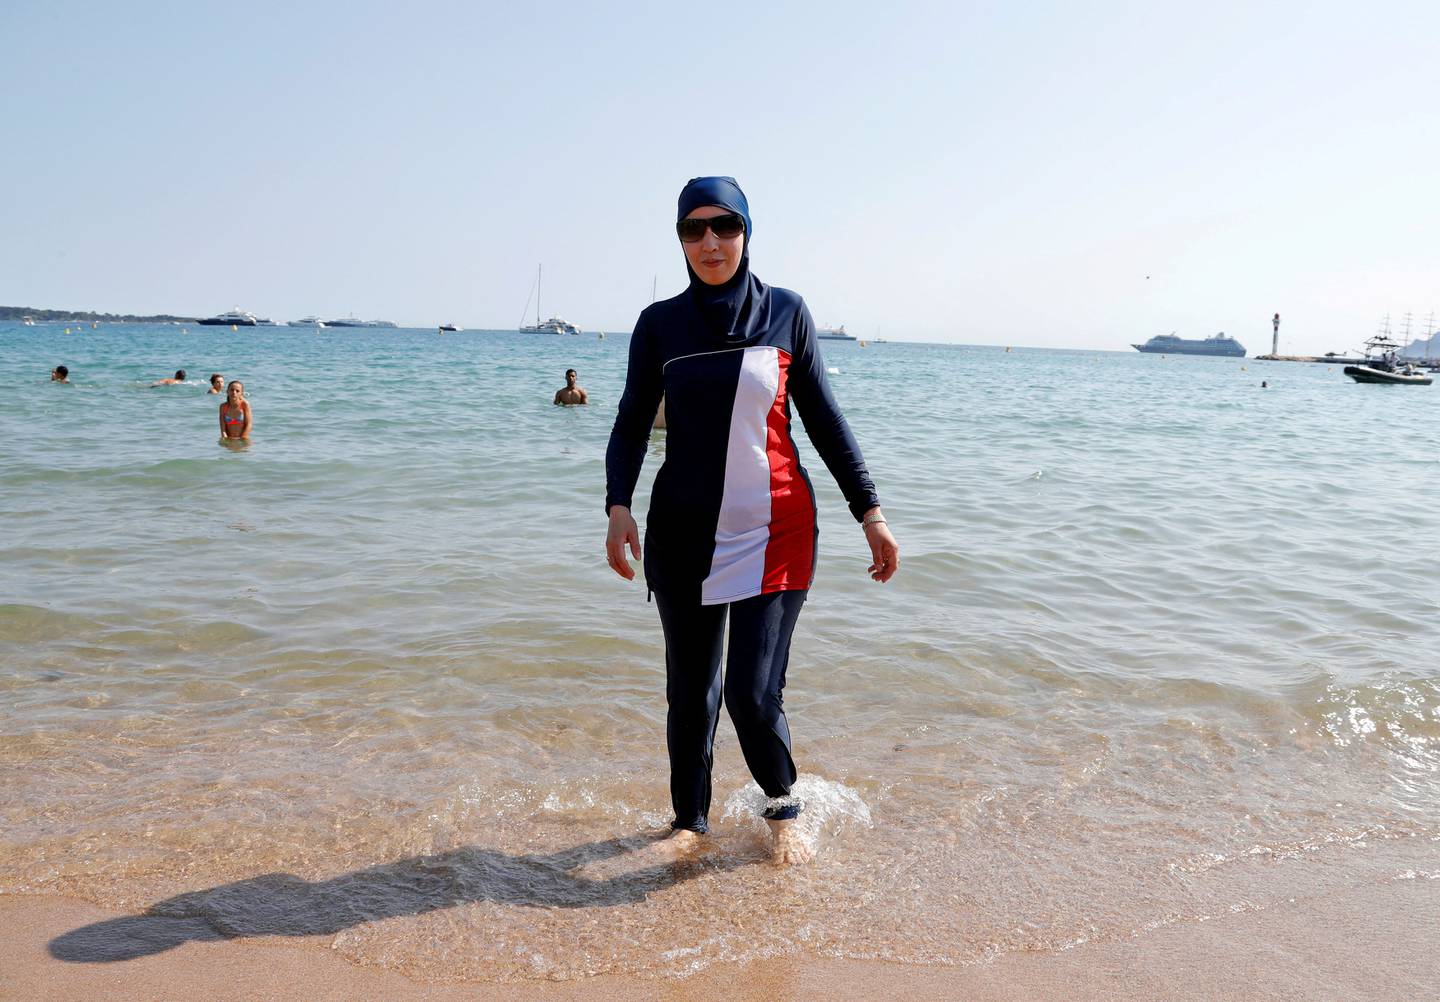 A woman wears a full-body swimsuit on a beach in Cannes after a call to support the wearing of burkinis. Reuters